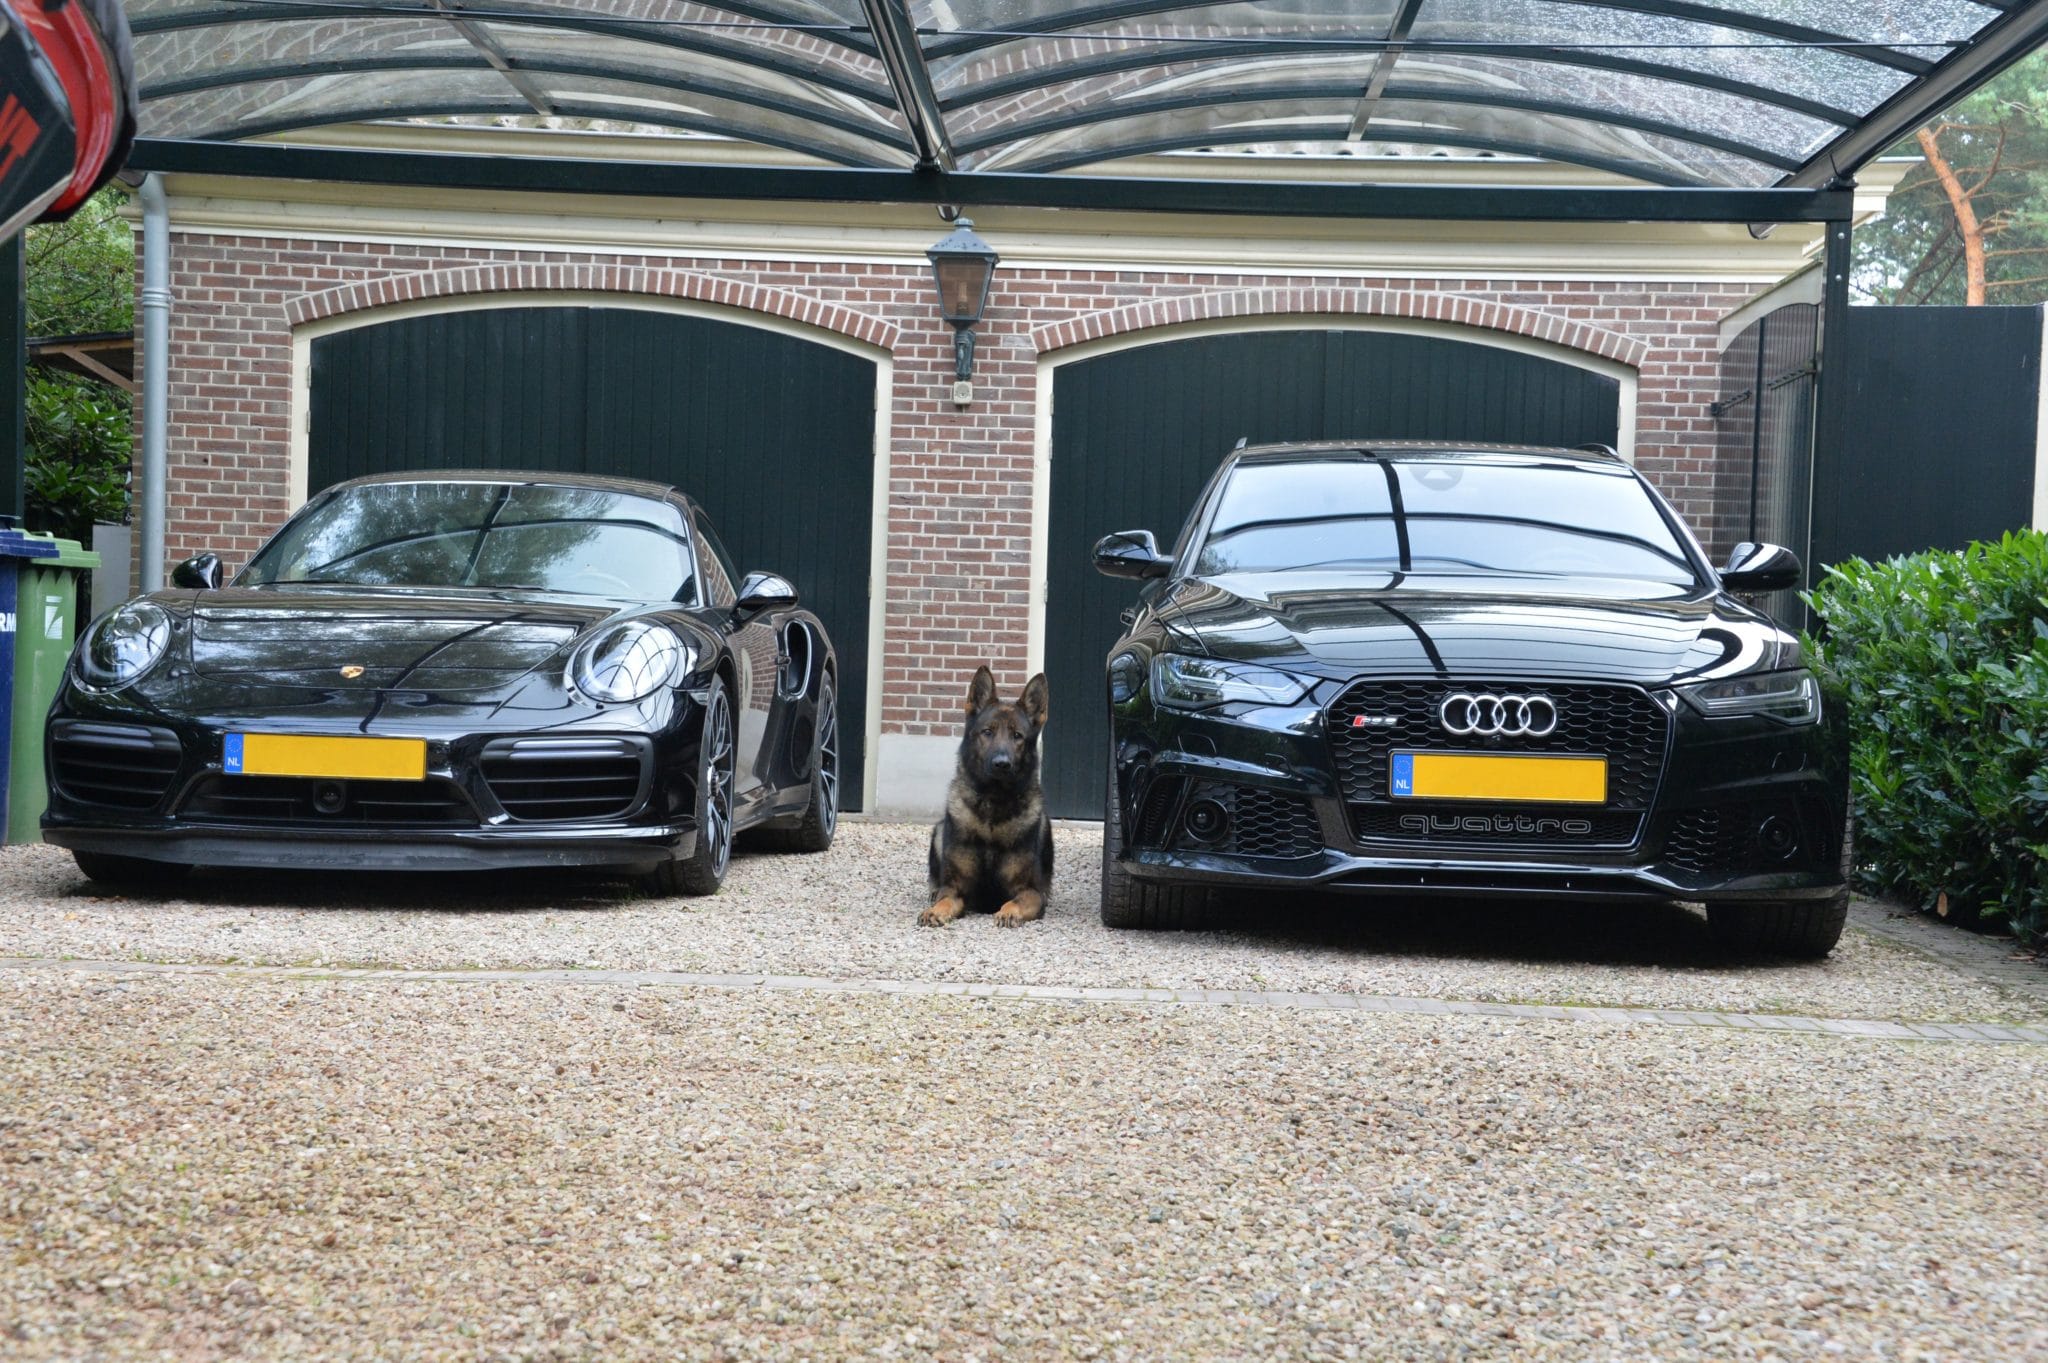 a1k9 Dog in between audi and porsche